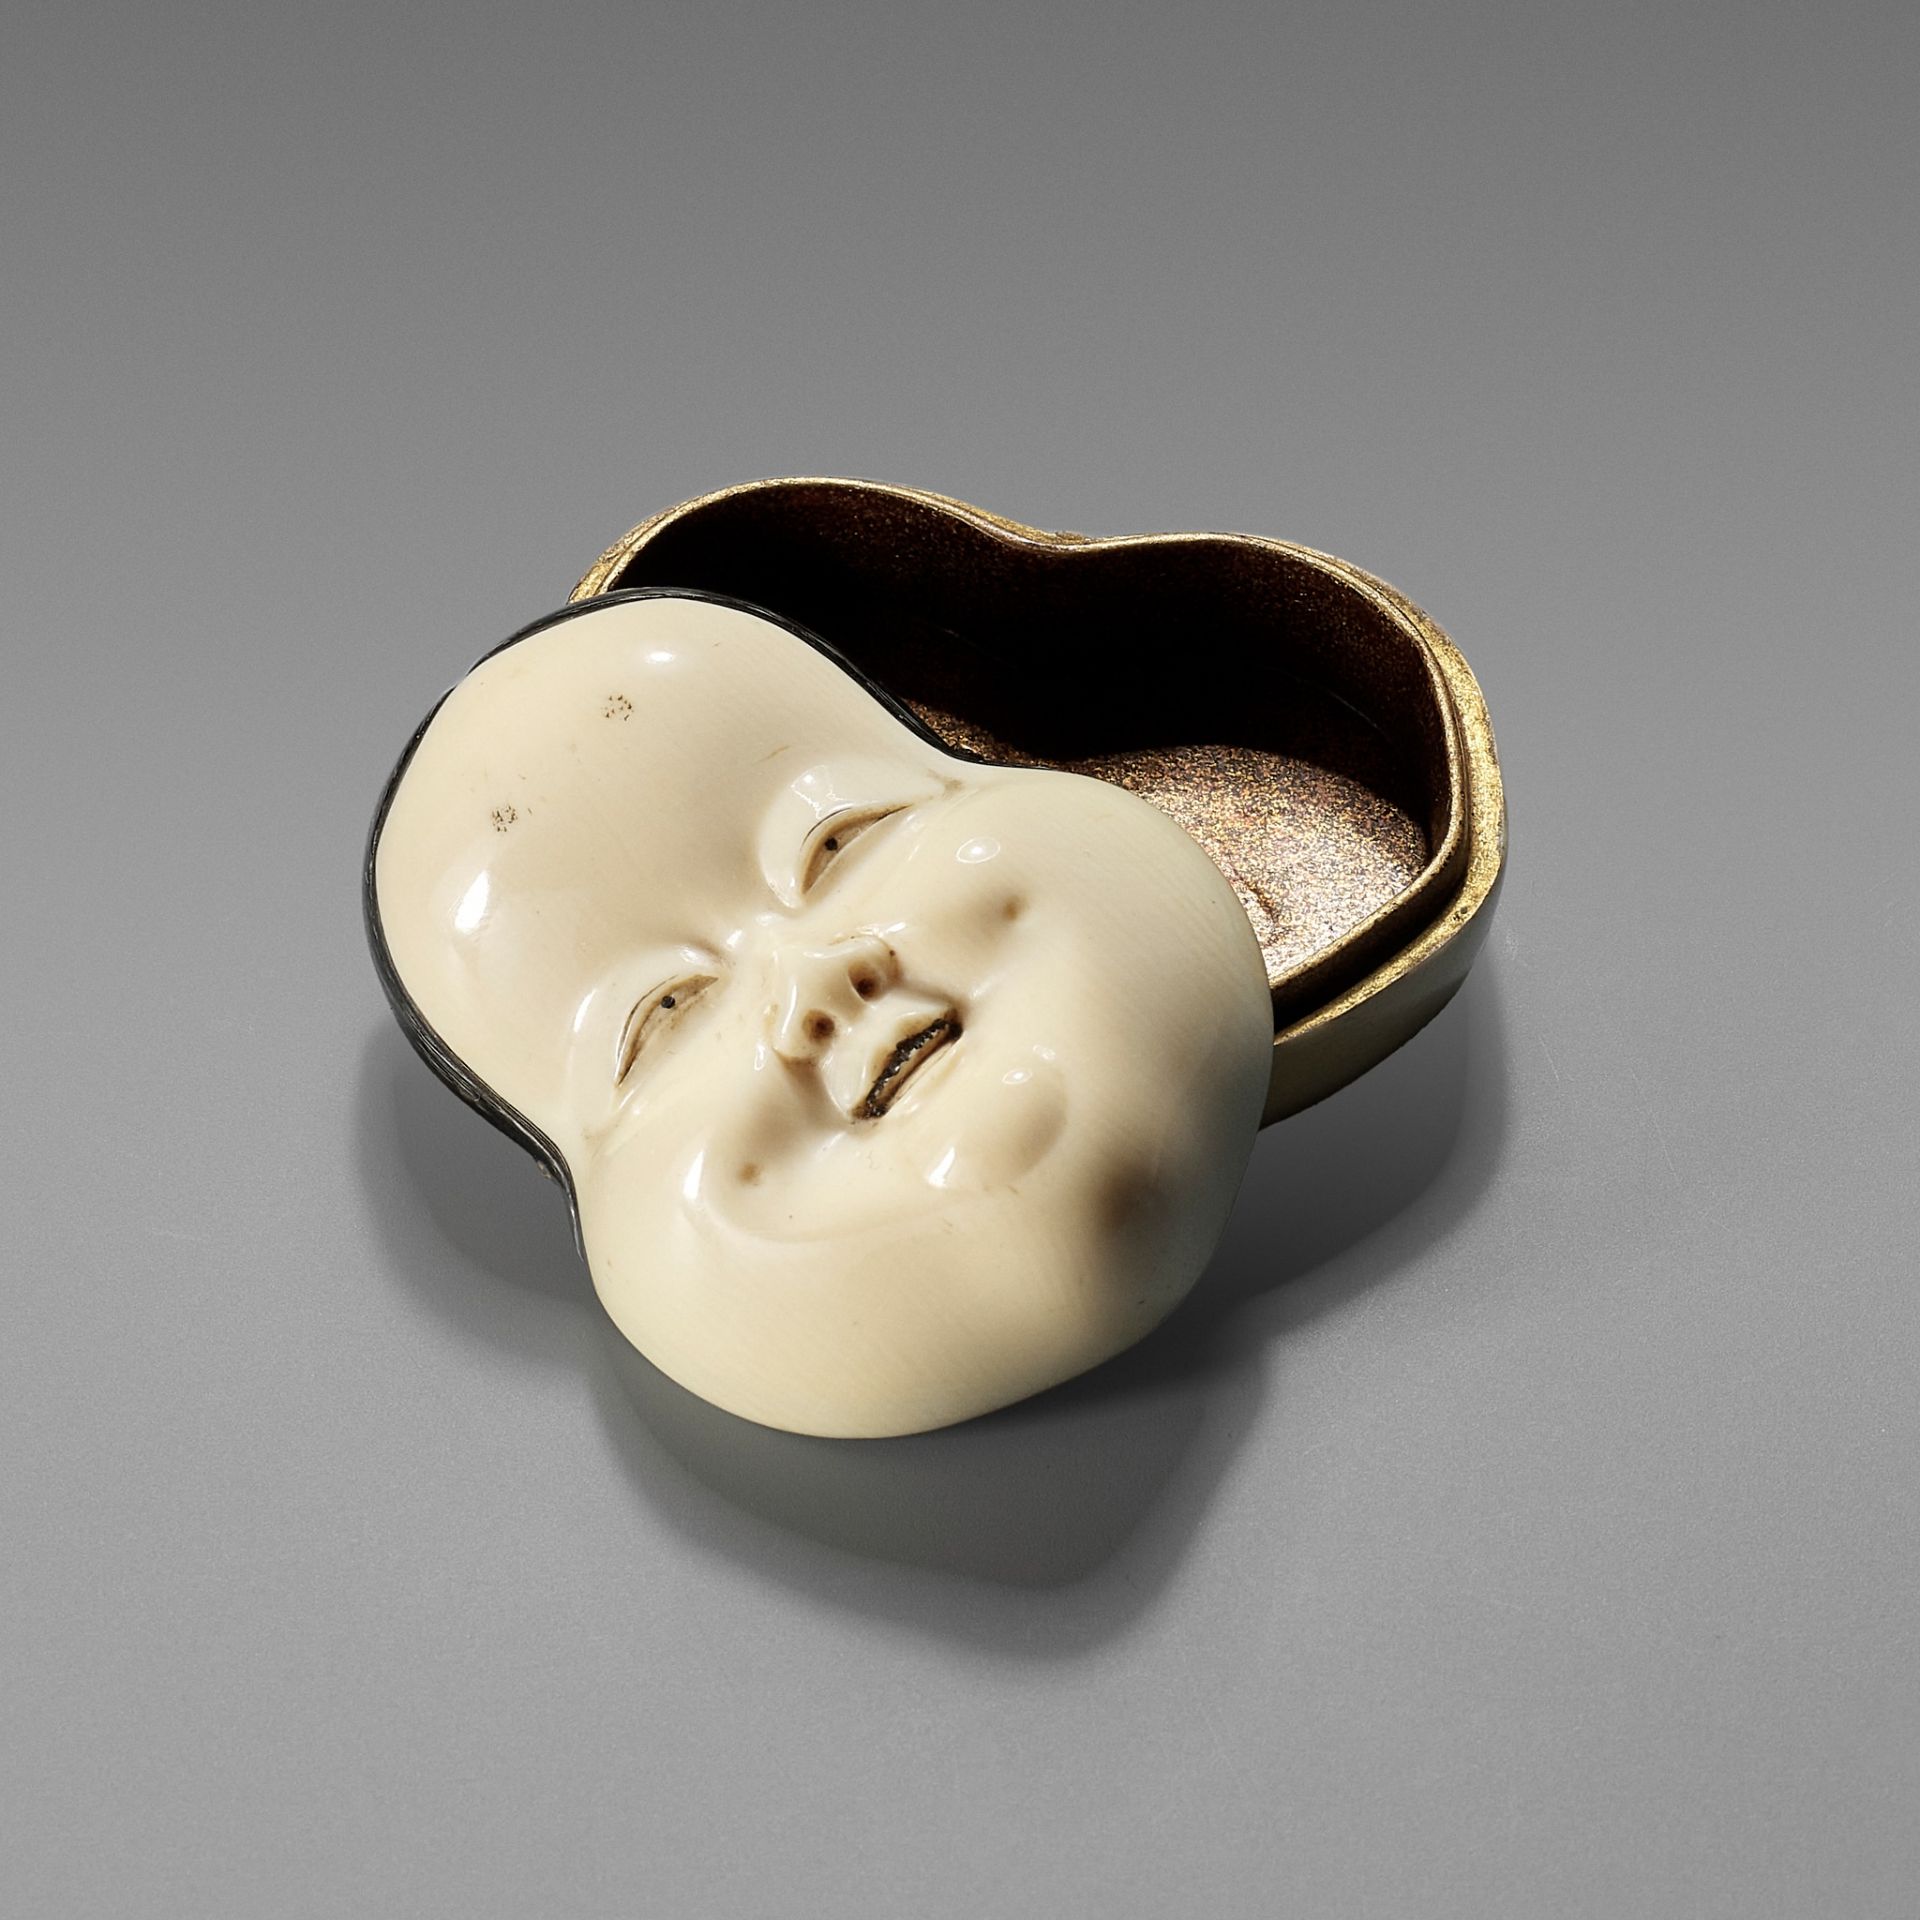 YOZEI: A RARE LACQUERED IVORY HAKO (BOX) AND COVER IN THE FORM OF AN OKAME MASK, DATED 1705